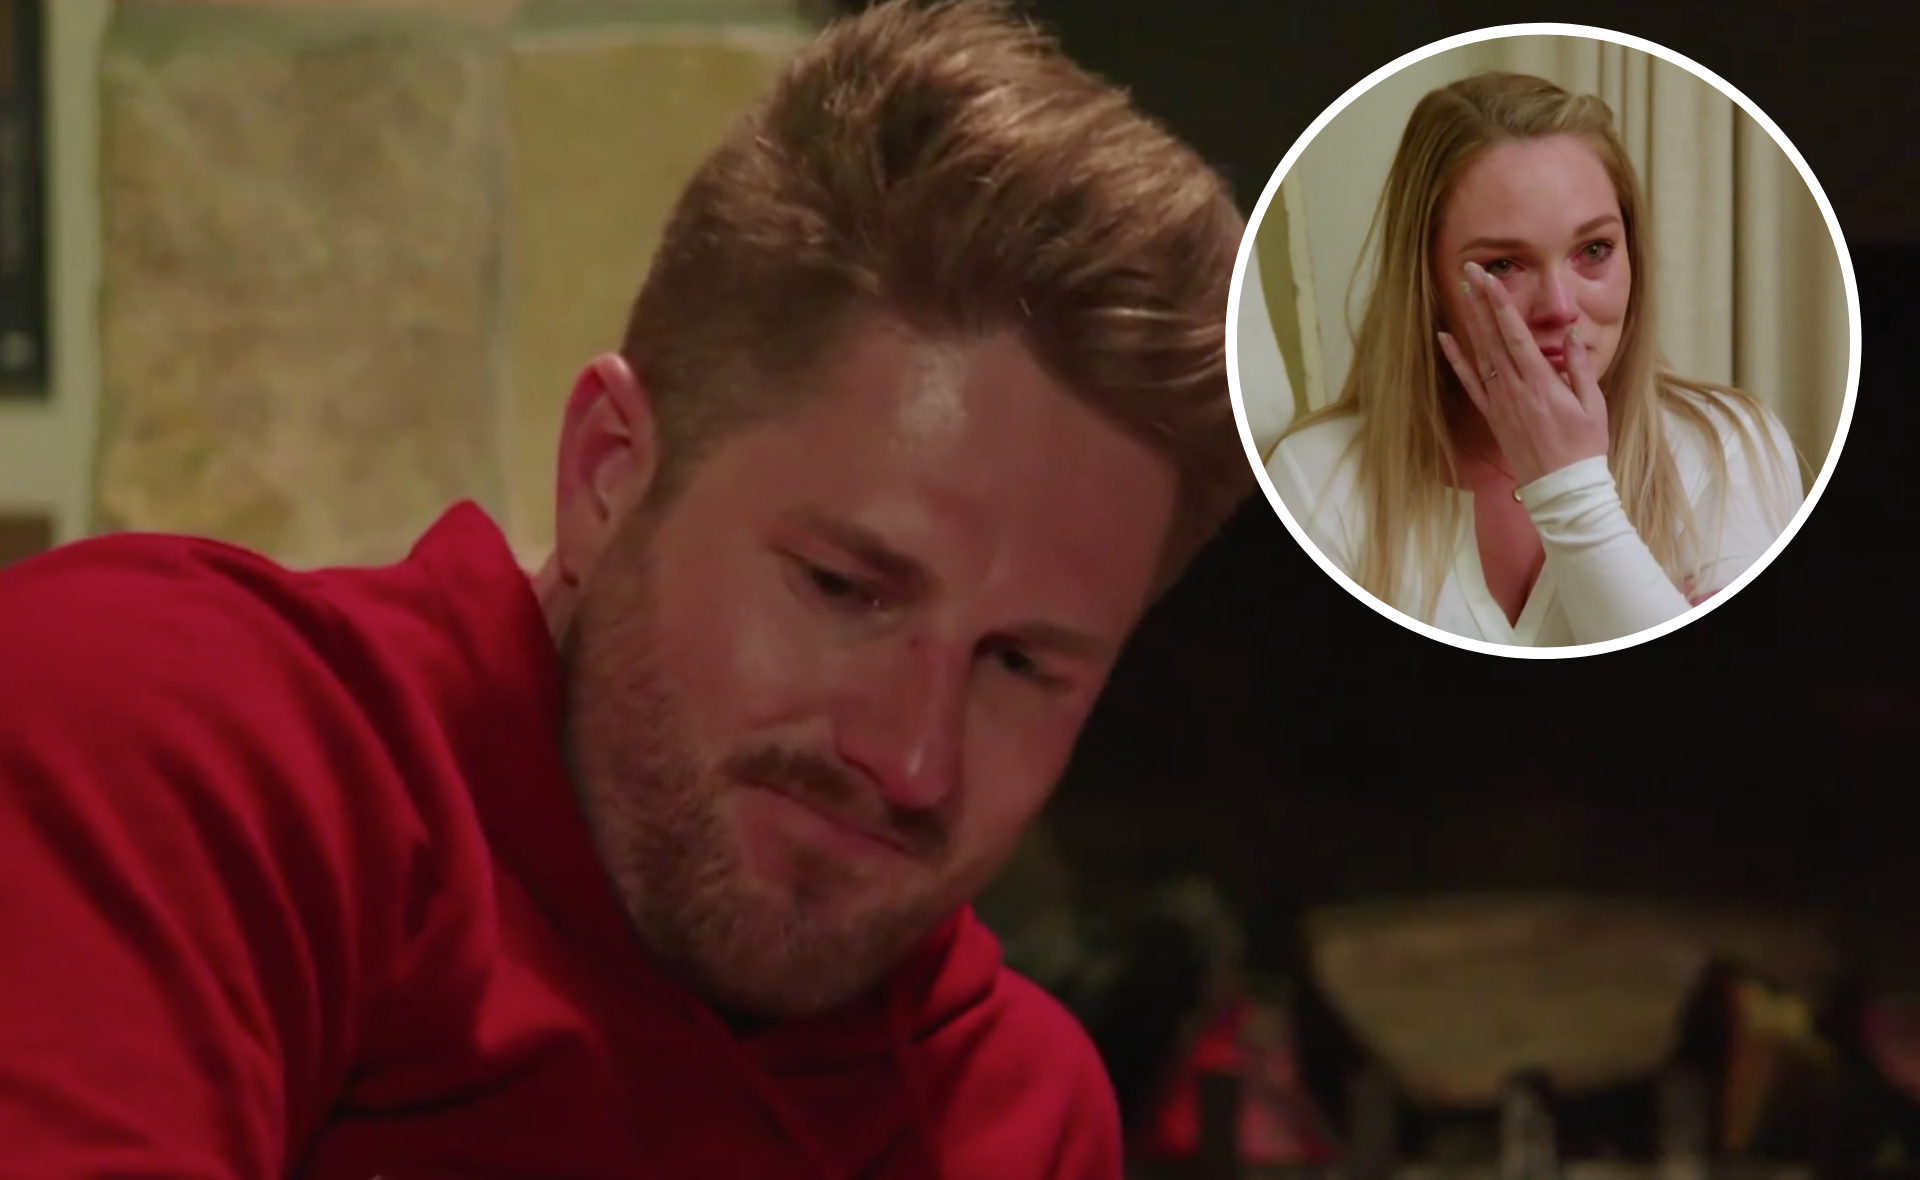 ”He was Facetiming her during filming!” MAFS star Bryce Ruthven’s secret girlfriend exposed